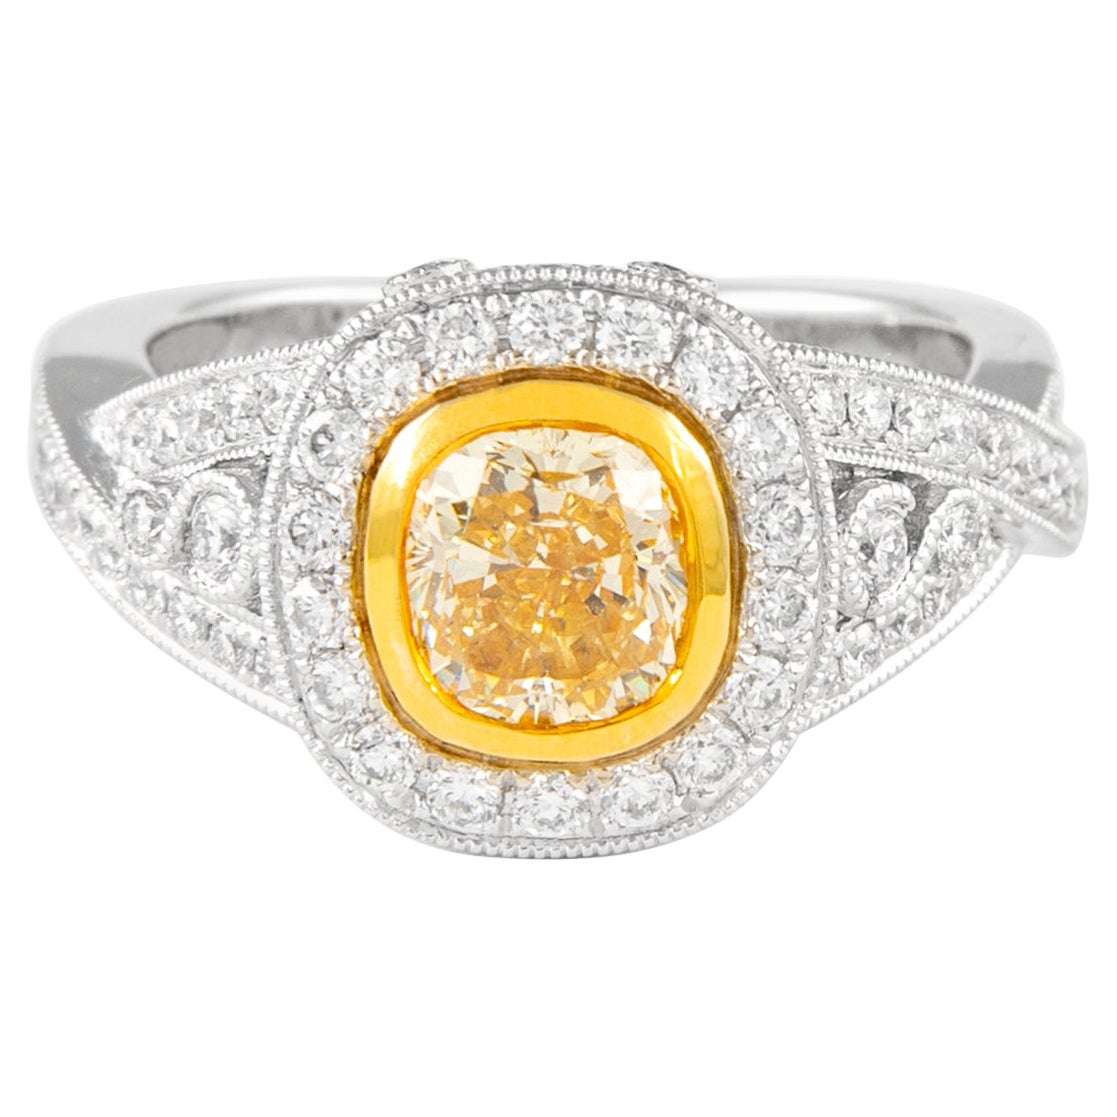 Alexander 1.31ct Fancy Intense Yellow Cushion Diamond with Halo Ring 18k Two Ton For Sale